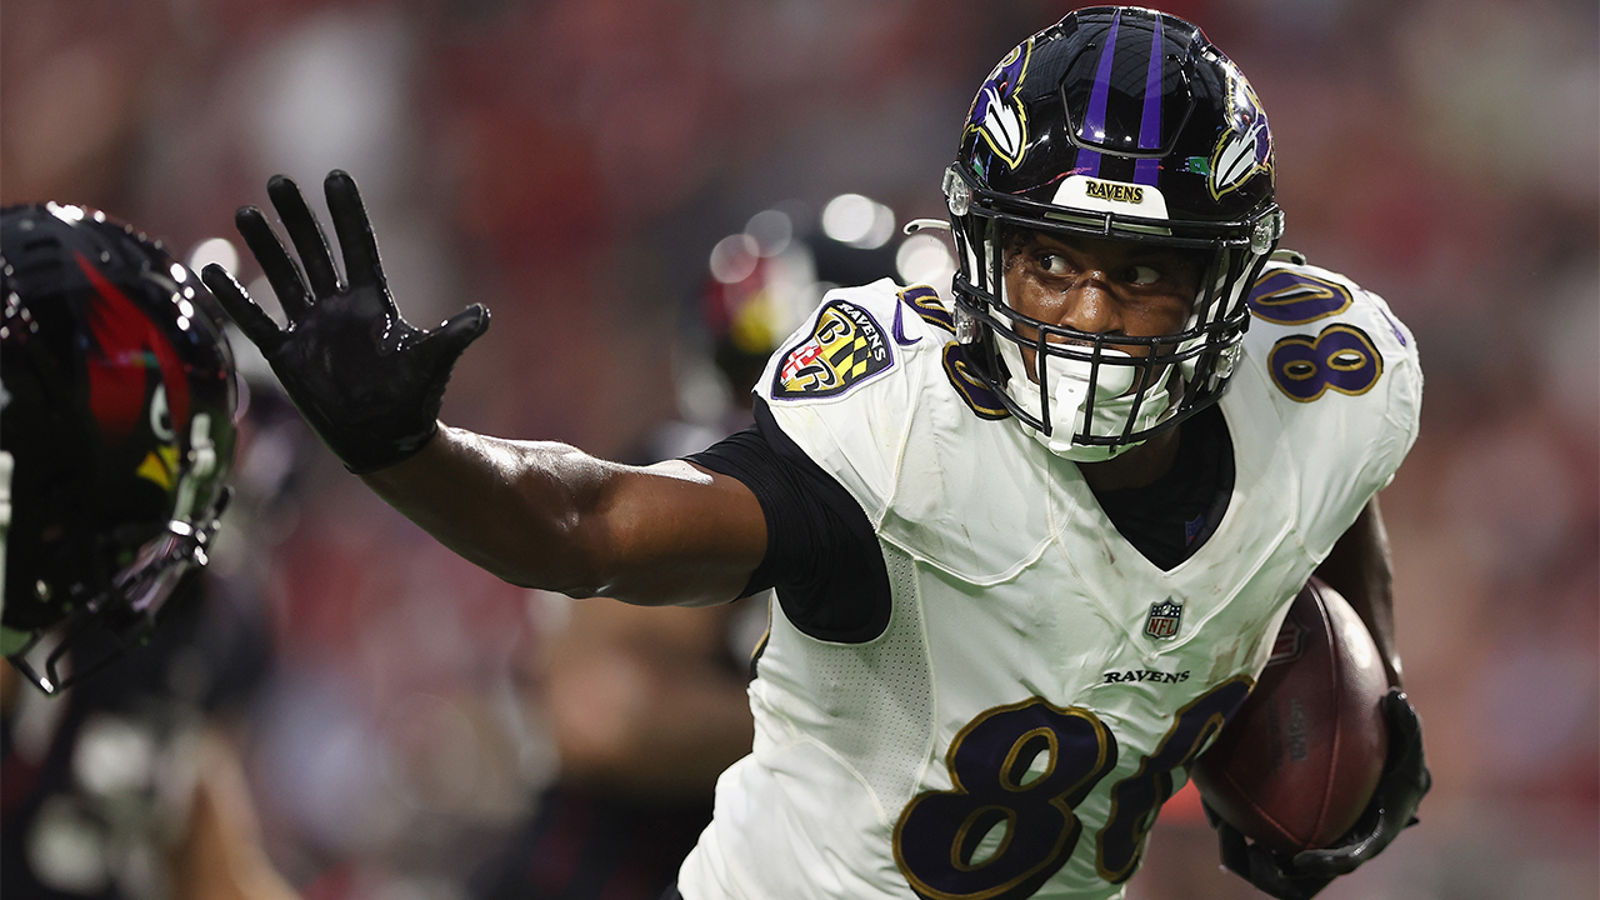 Isaiah Likely leads Ravens over Cardinals 